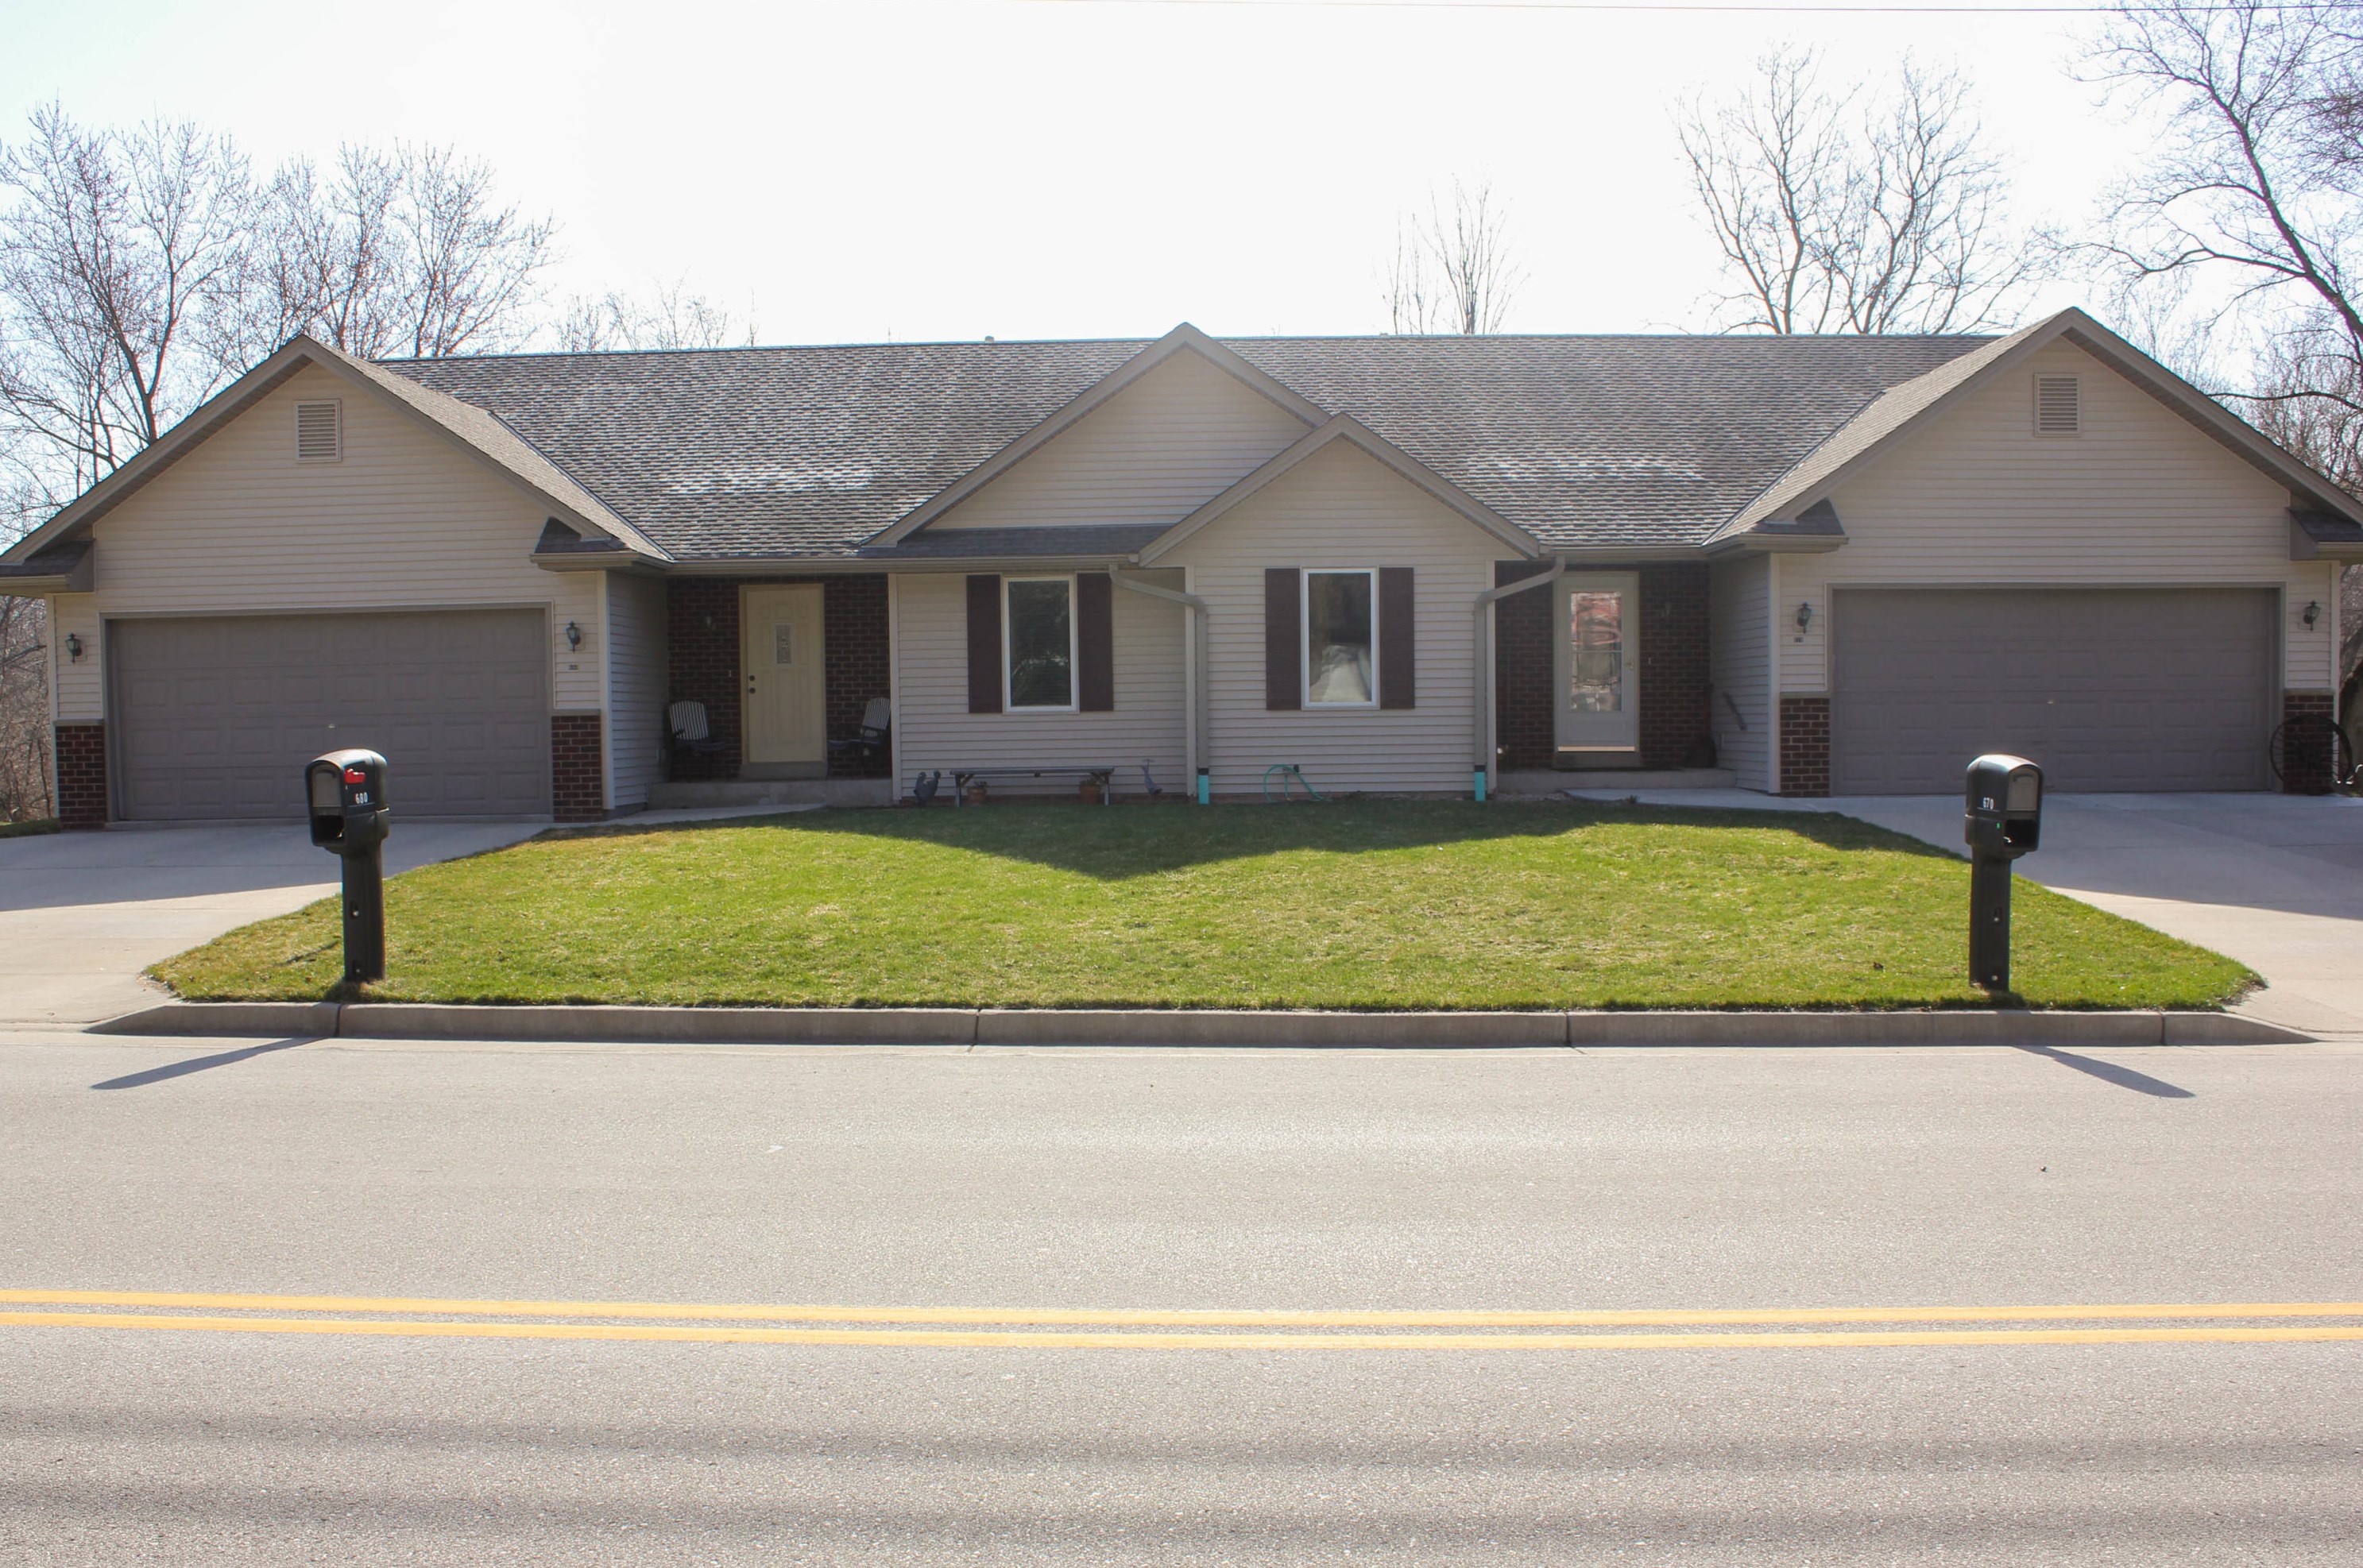 670 Wisconsin St, Adell, WI 53001